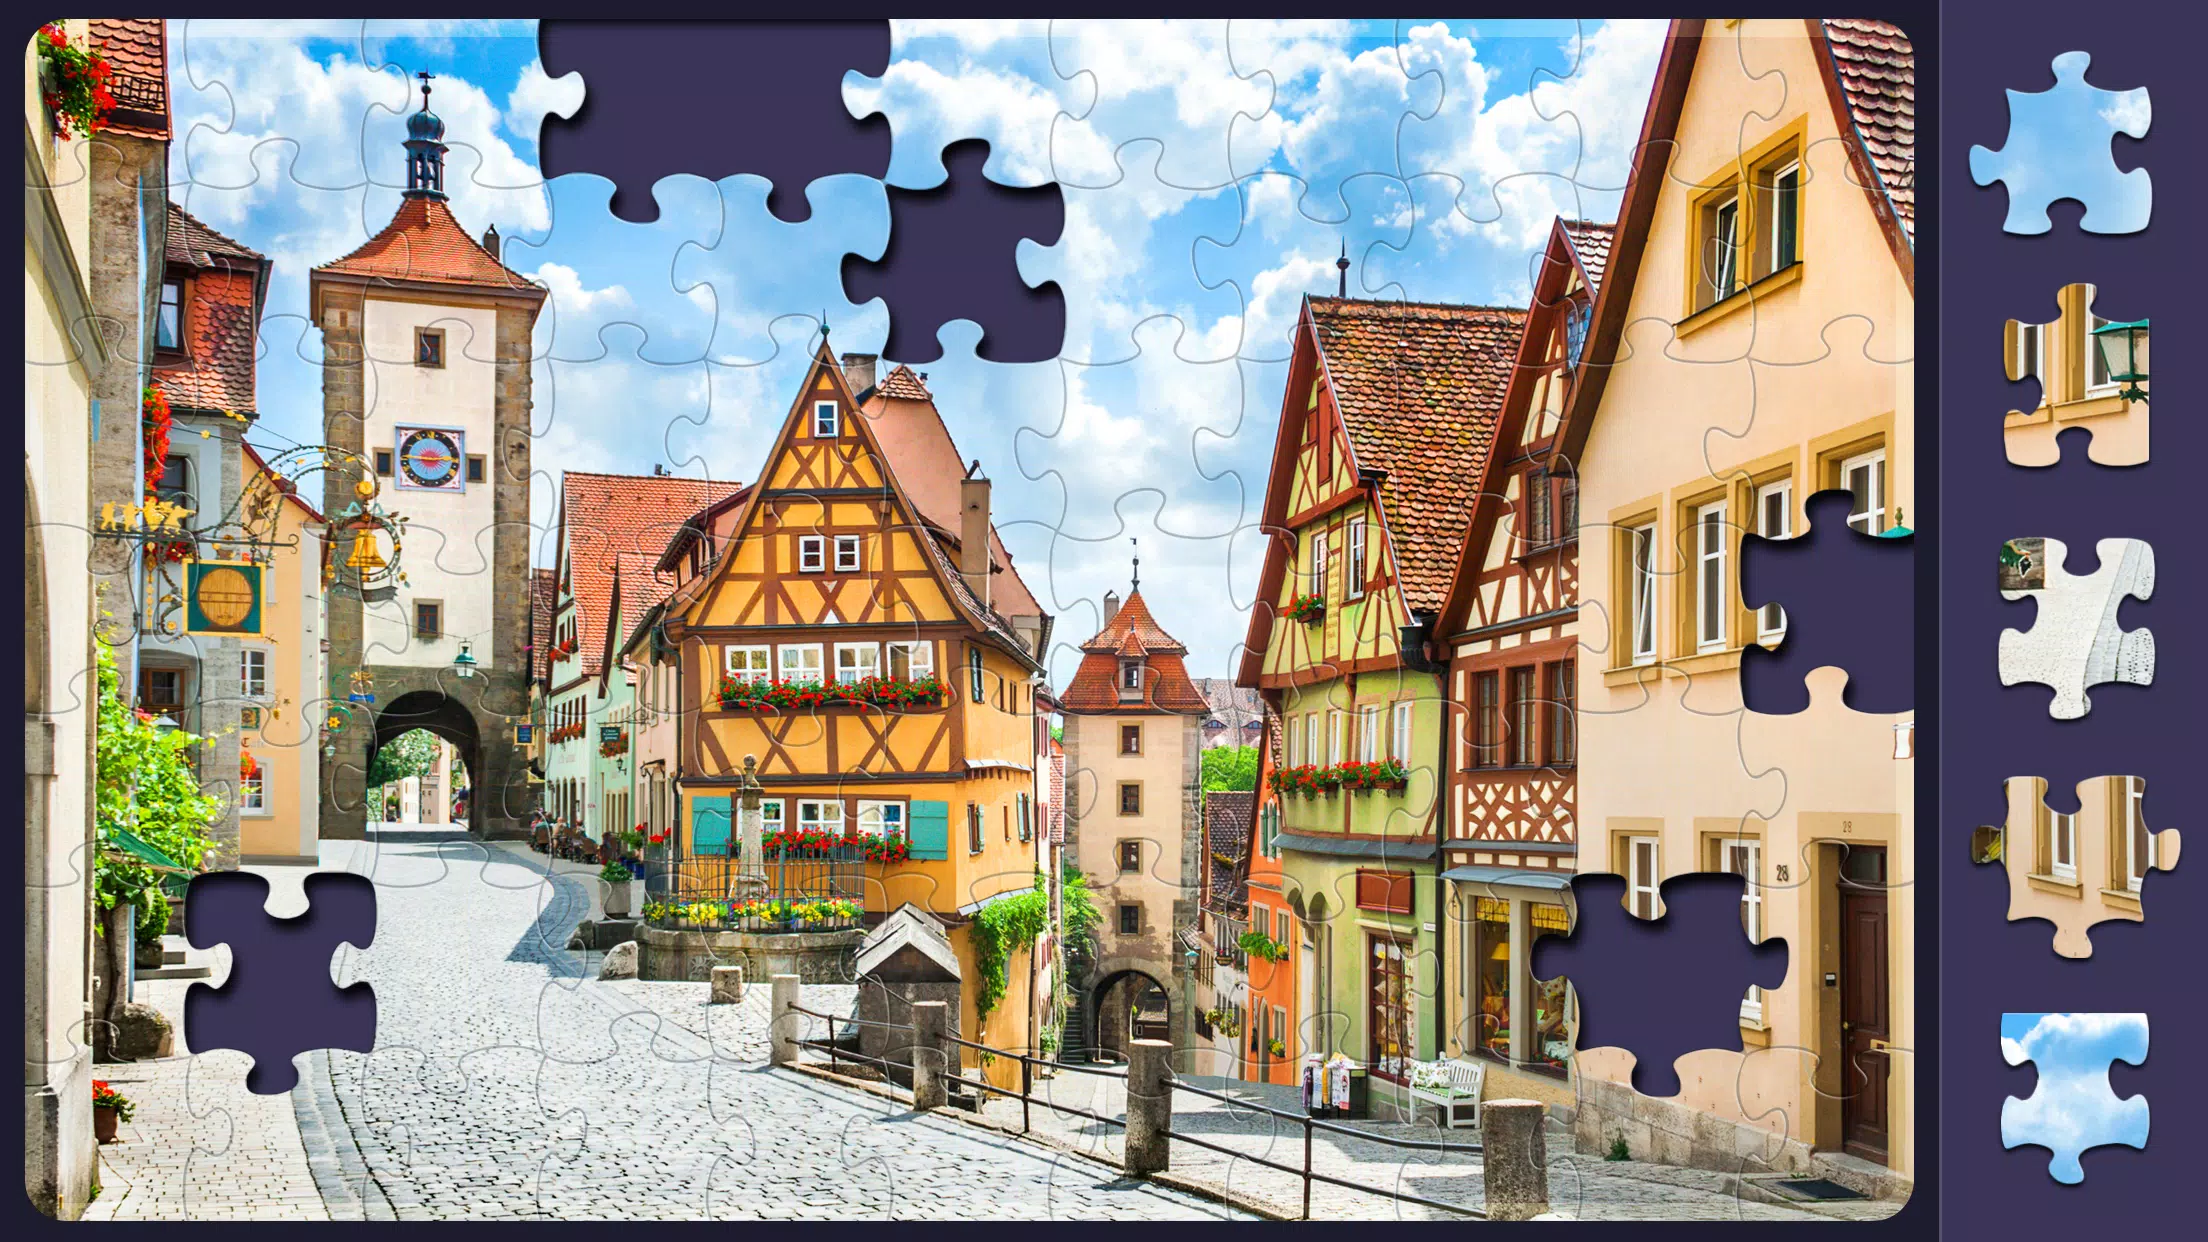 Relax Jigsaw Puzzles APK para Android - Download